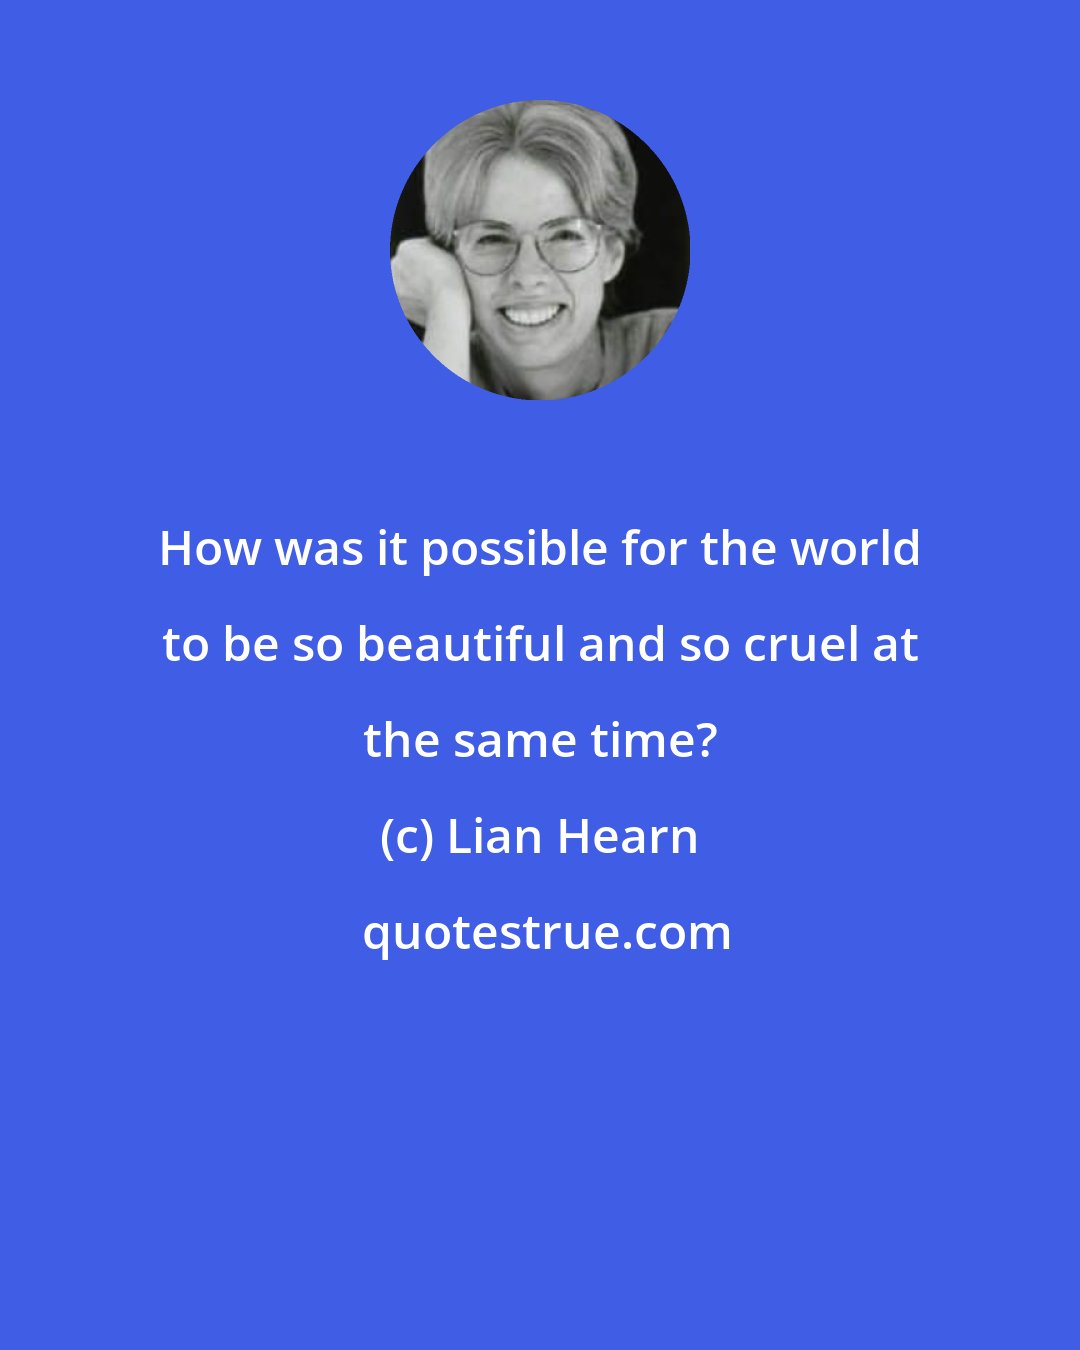 Lian Hearn: How was it possible for the world to be so beautiful and so cruel at the same time?